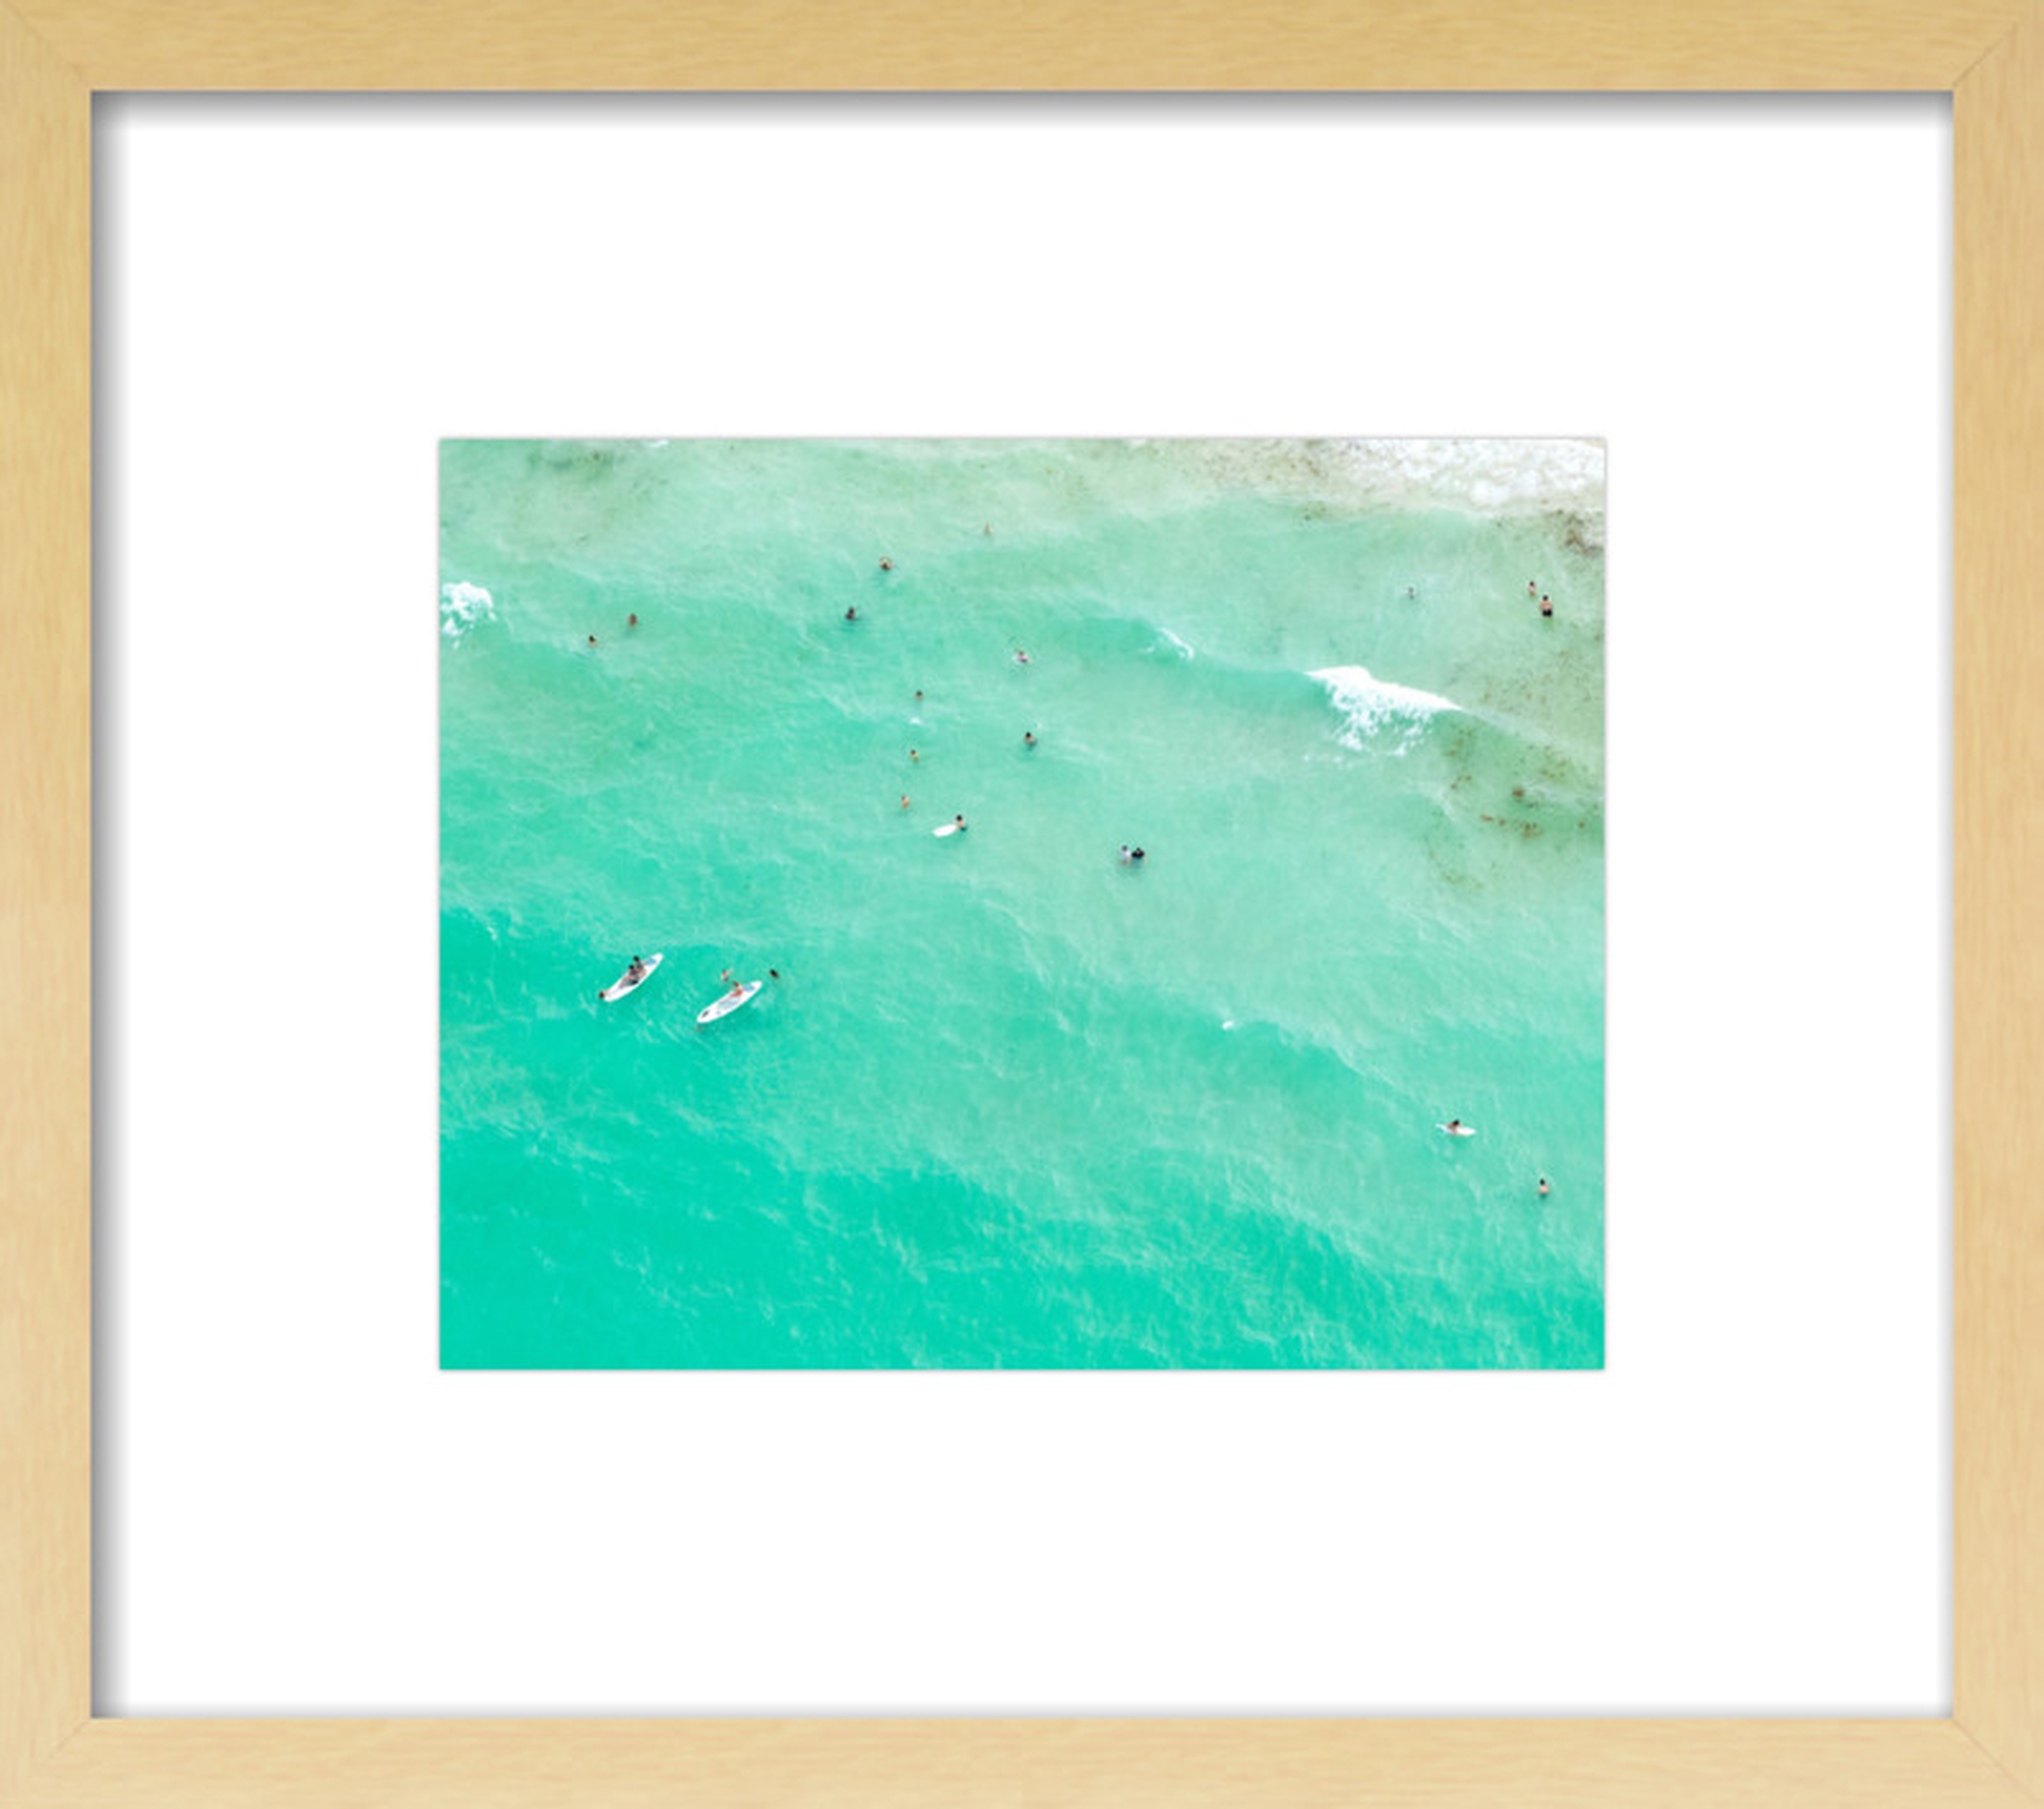 Paddleboarders // 12" x 10" // Natural Smooth Veneer Frame // With Matte - Artfully Walls